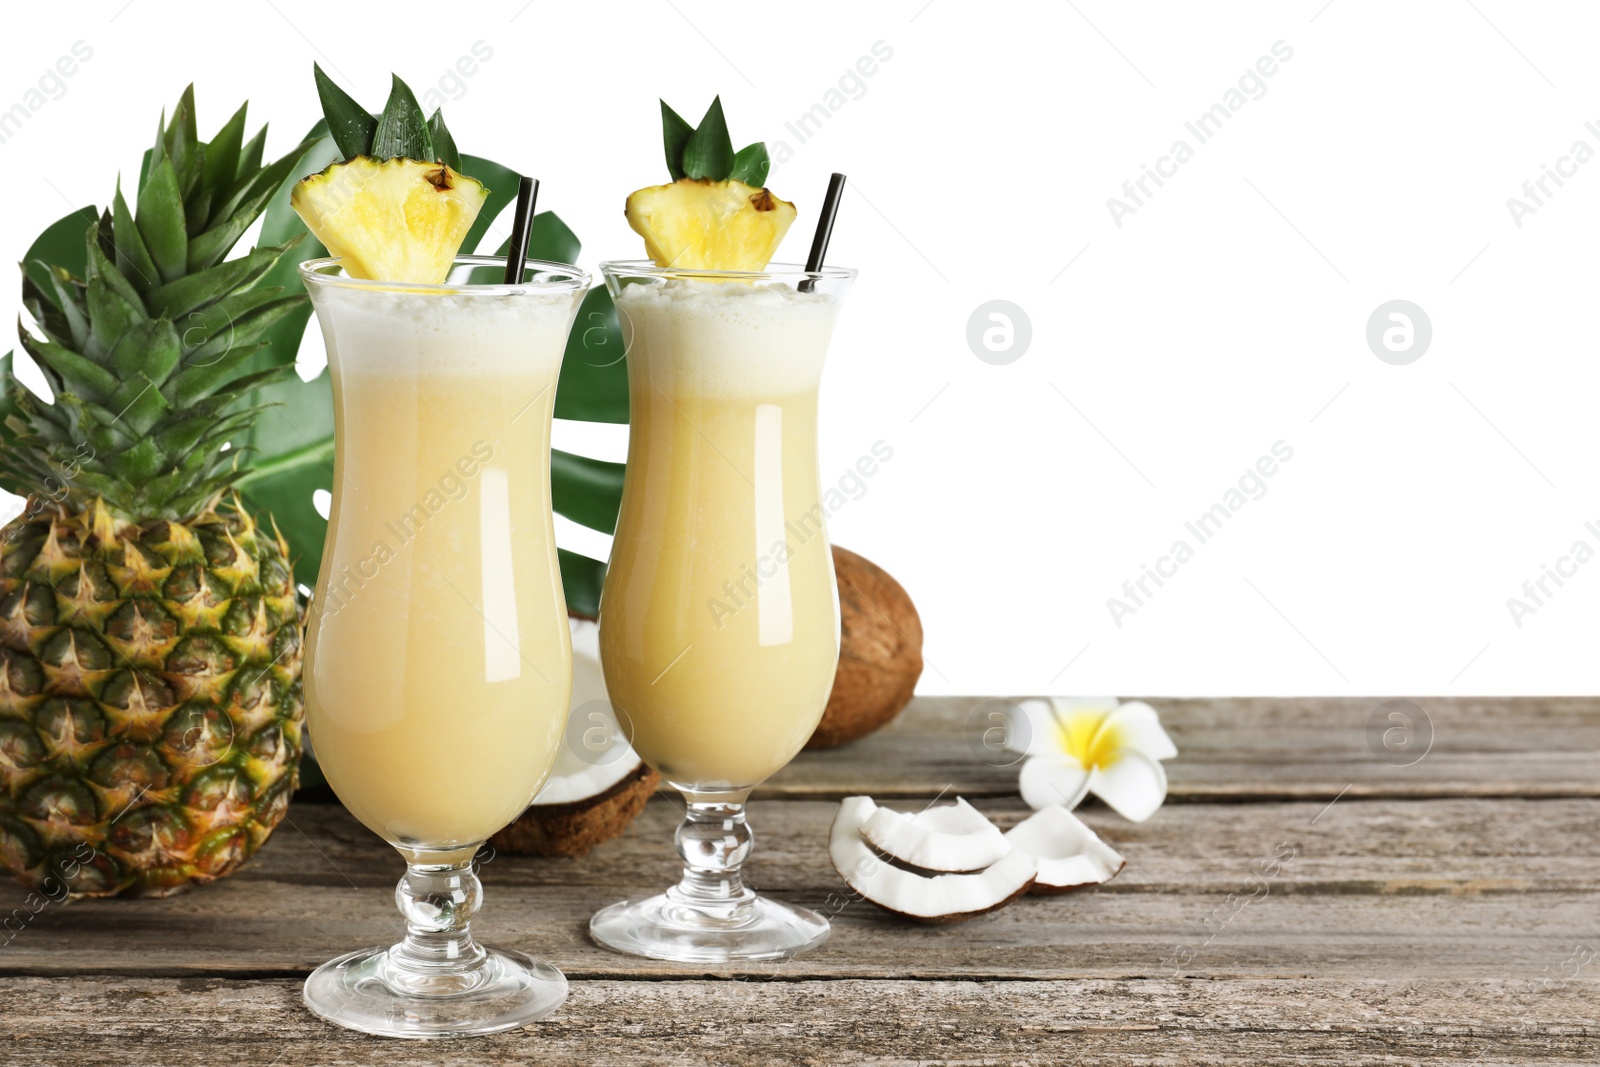 Photo of Tasty Pina Colada cocktail and ingredients on wooden table against white background, space for text